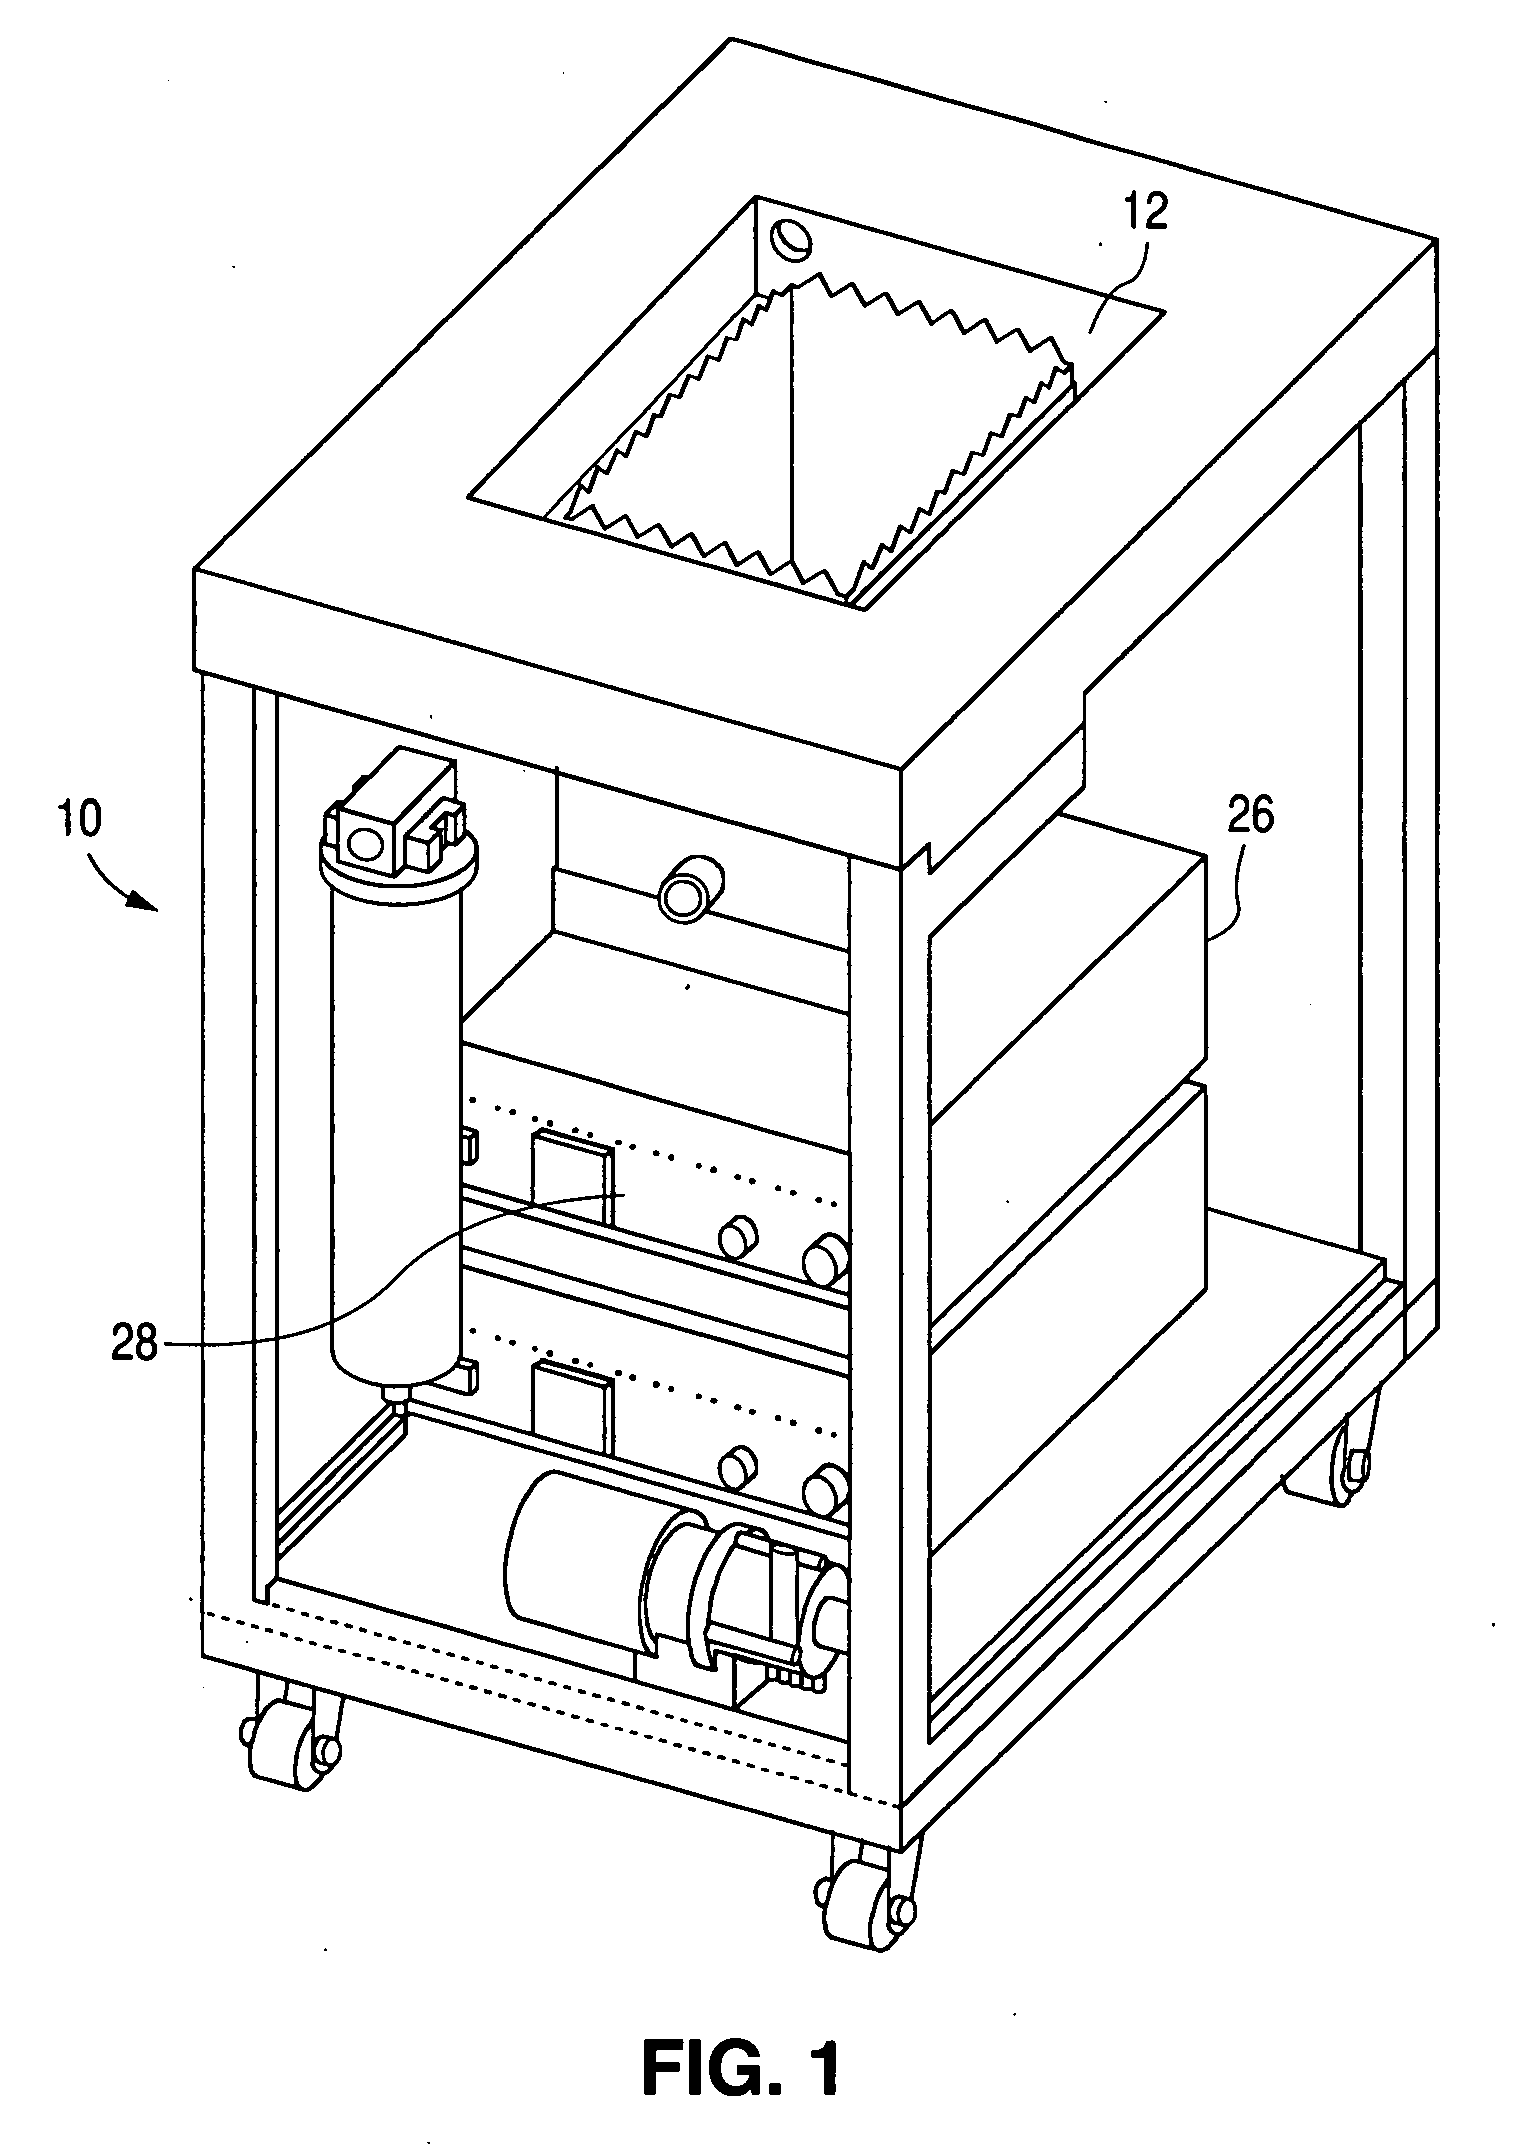 Megasonic processing apparatus with frequency sweeping of thickness mode transducers